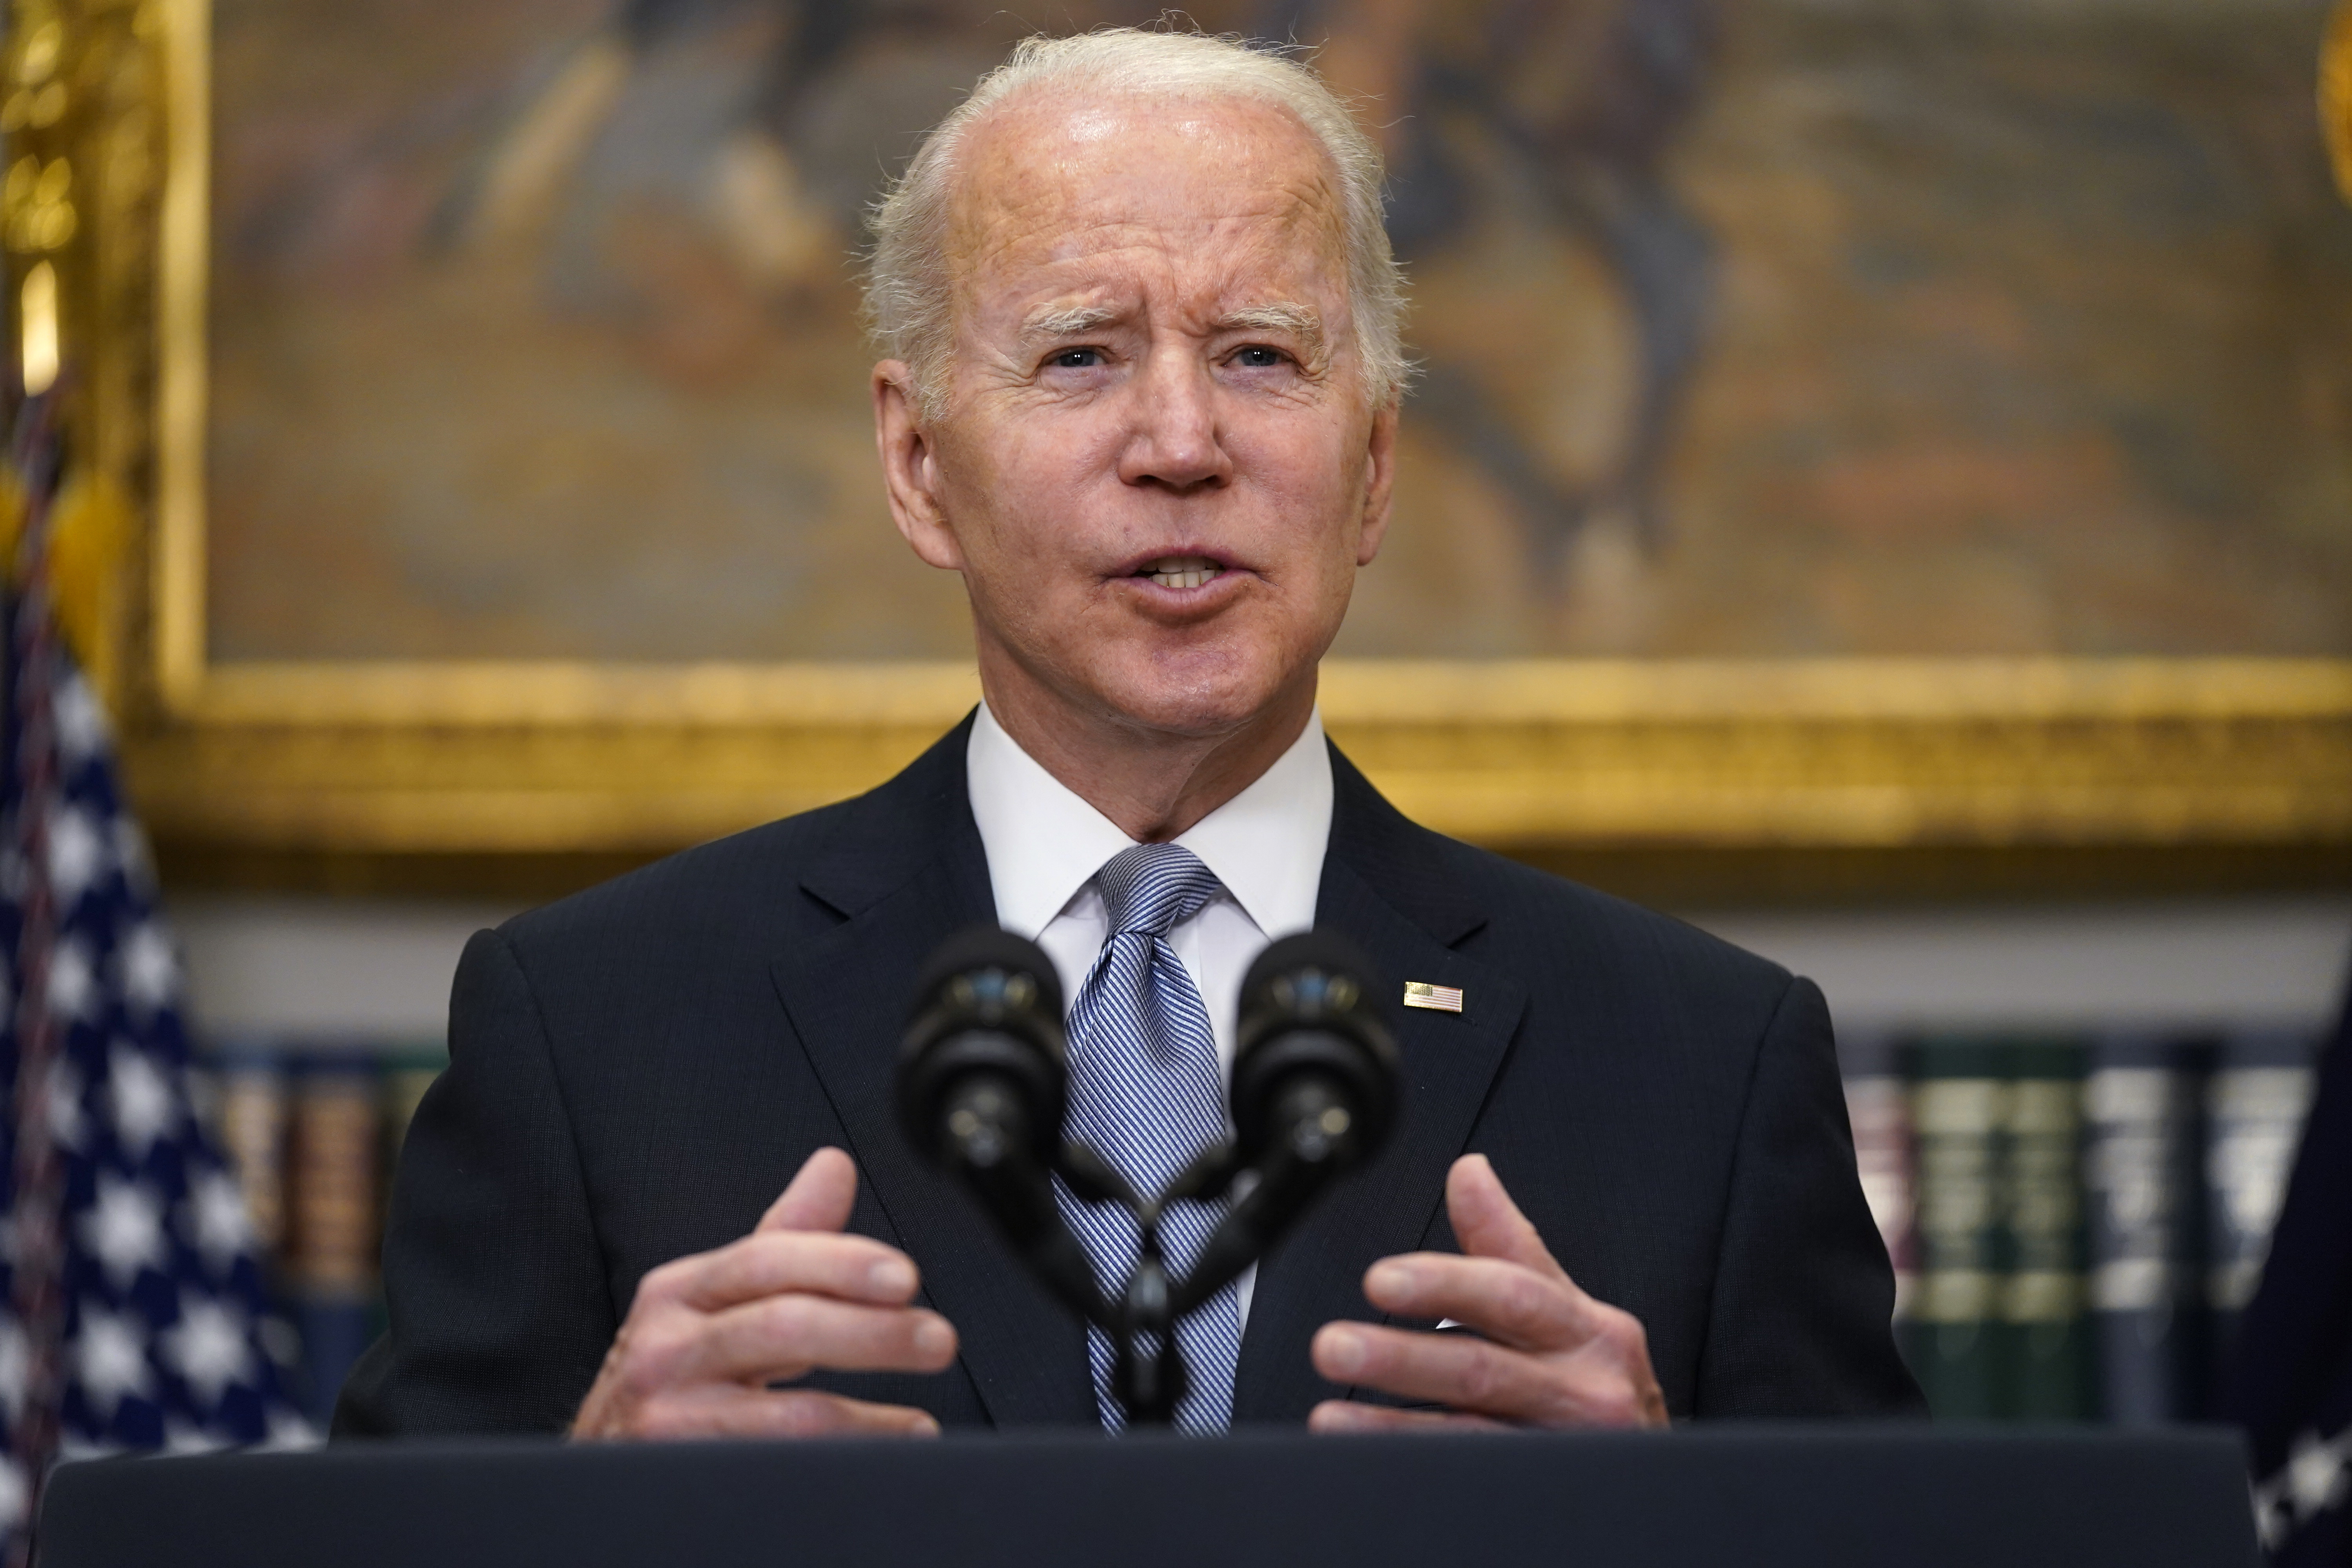 President Joe Biden delivers remarks on the Russian invasion of Ukraine in the Roosevelt Room of the White House, on April 21, in Washington, D.C.